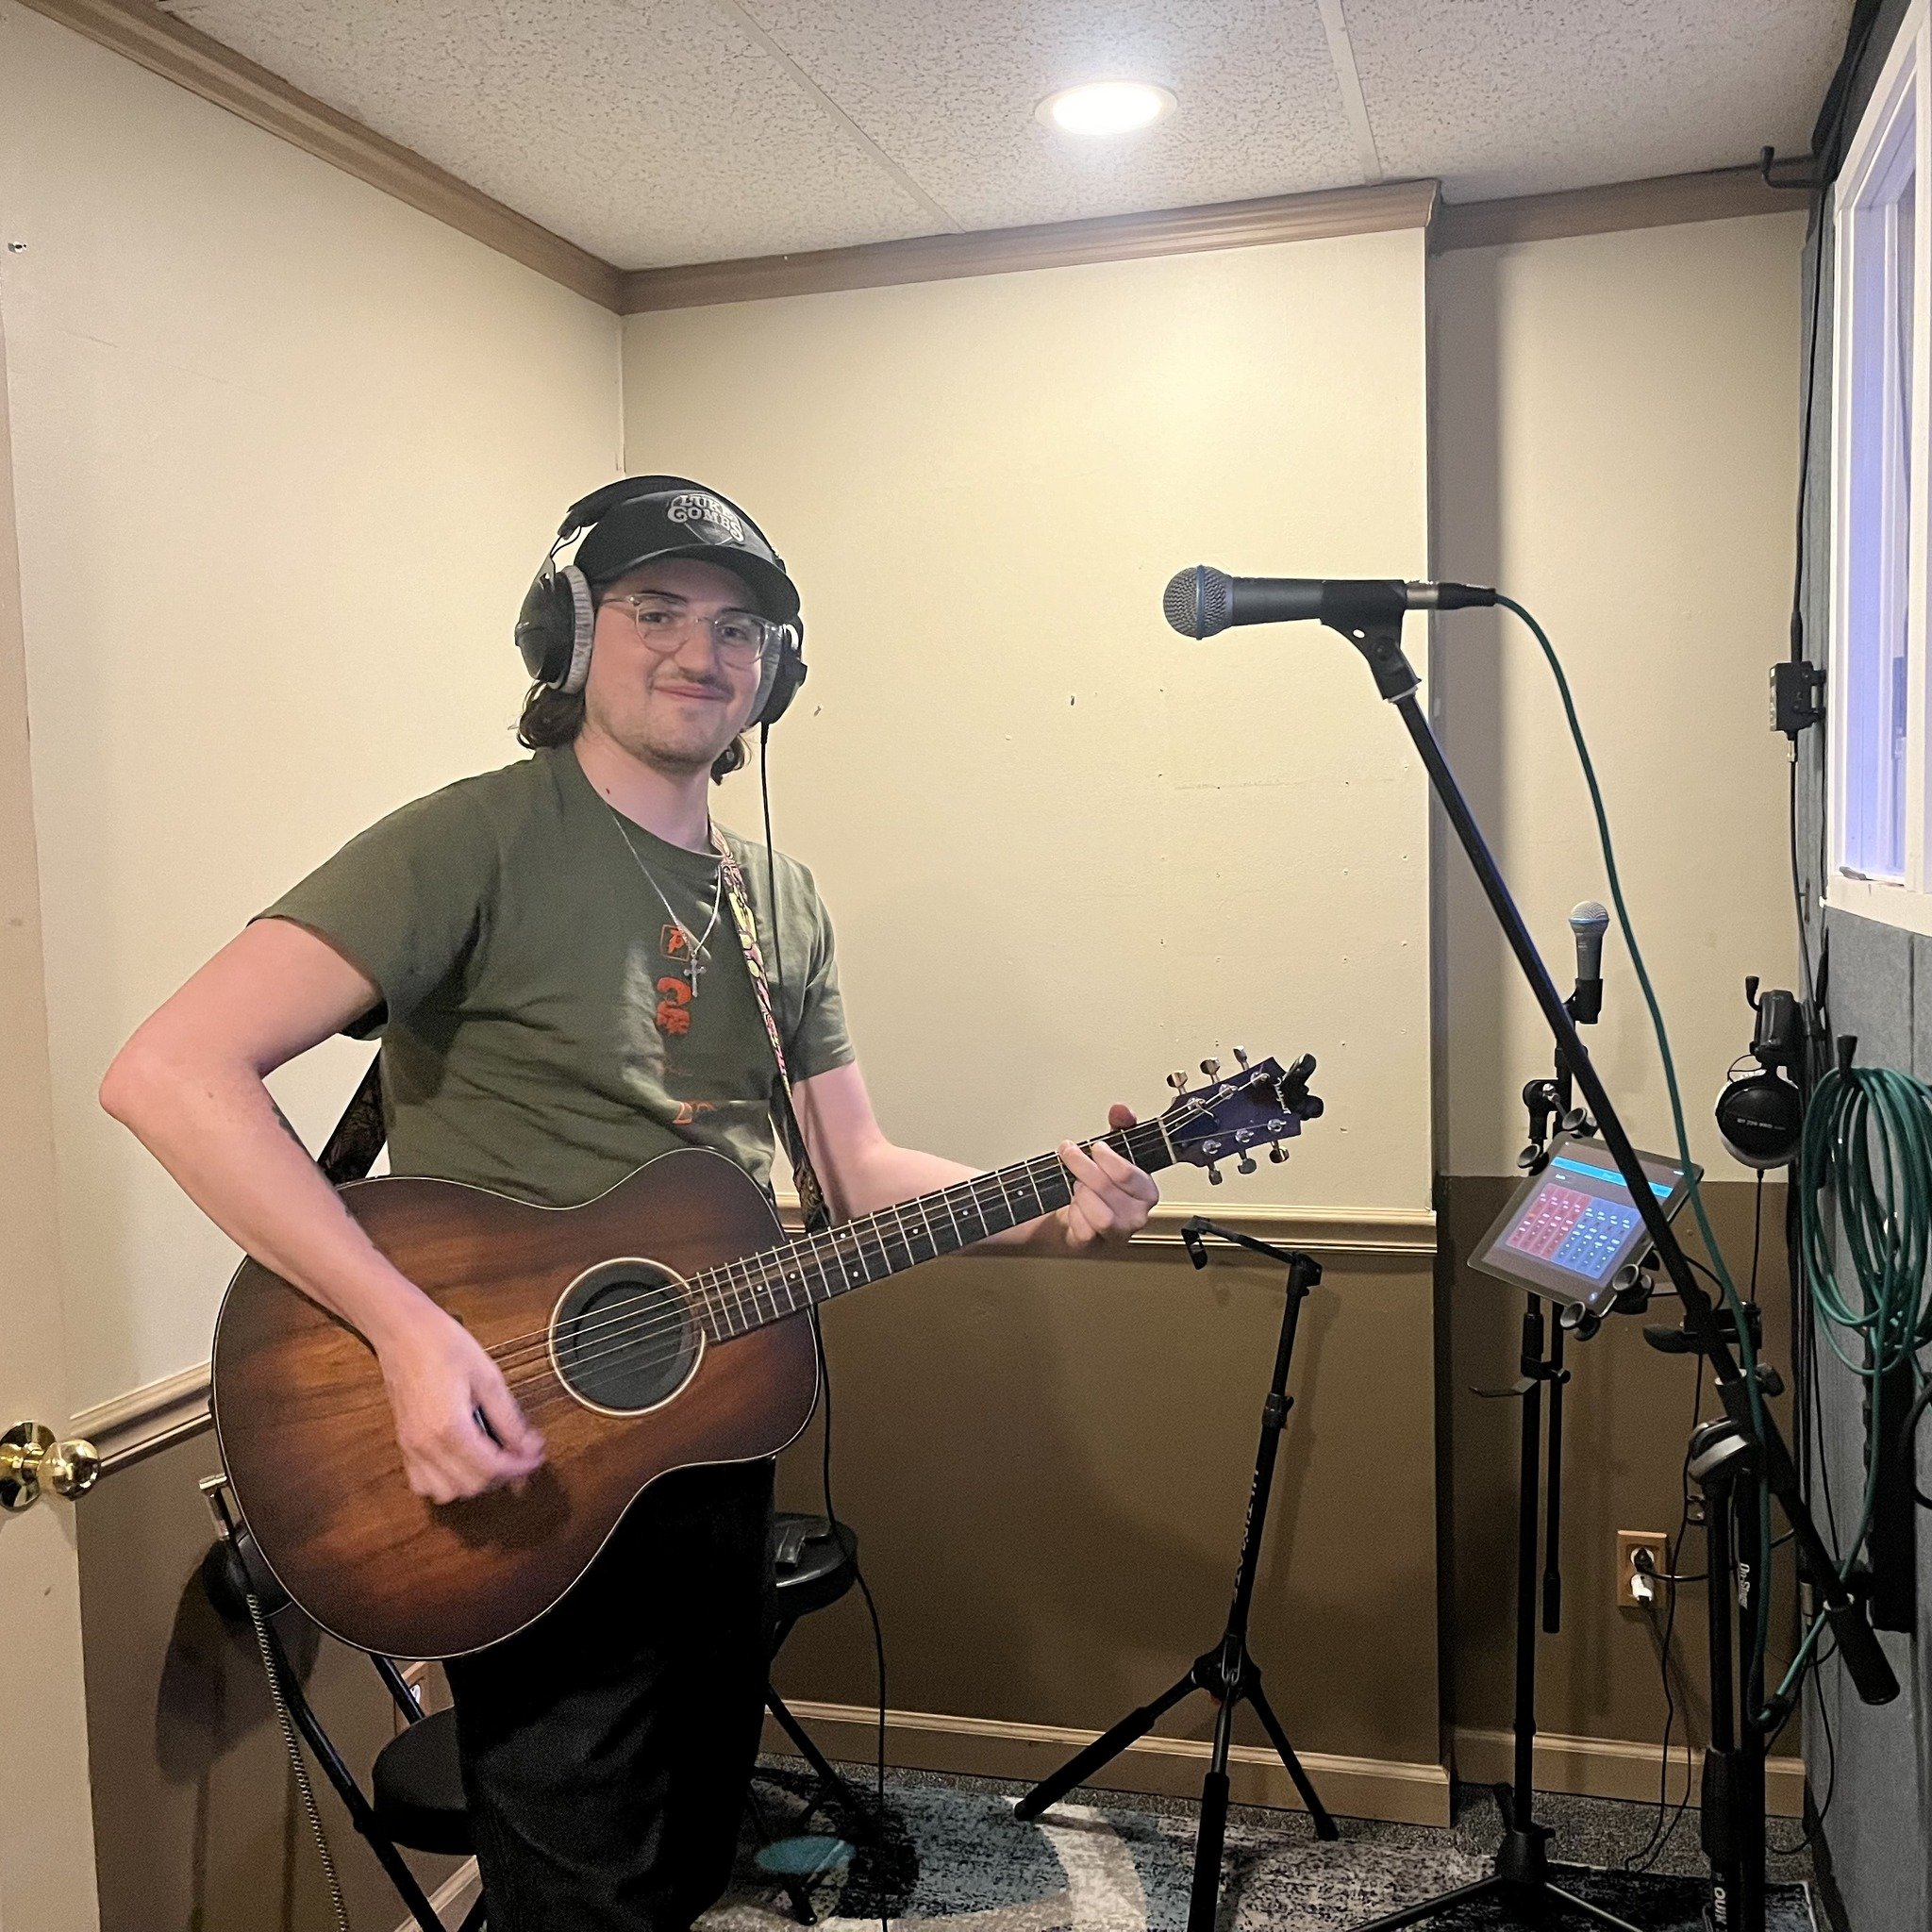 Live tracking with @liamsharkeymusic!
@christian_bojarski @voxtremolo 

Reach out to book a session or learn more&mdash;link in bio &gt;&gt;
.
.
.
#hiddencreekmusic #musicproducer #musicproduction #musicstudio #recordingstudio #recordingstudio #belle